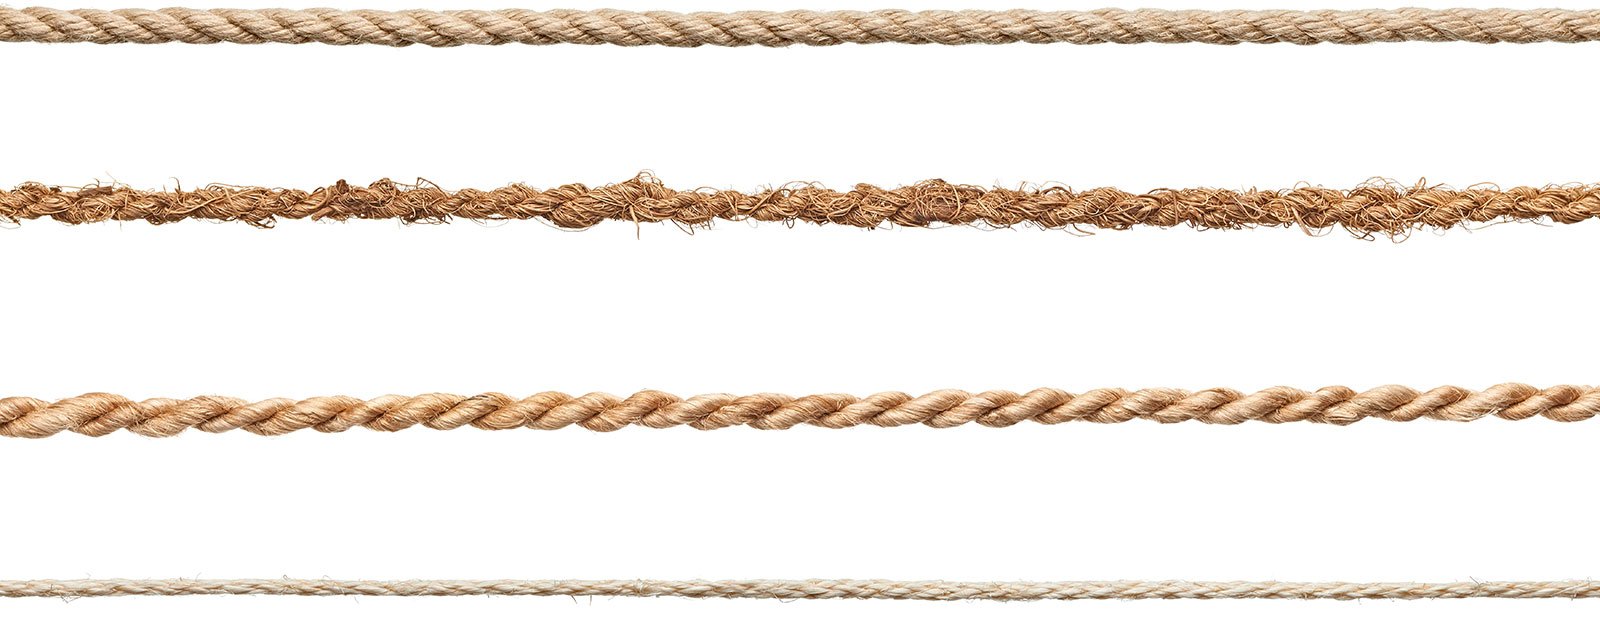 Here are some examples of different types of ropes and their best uses.